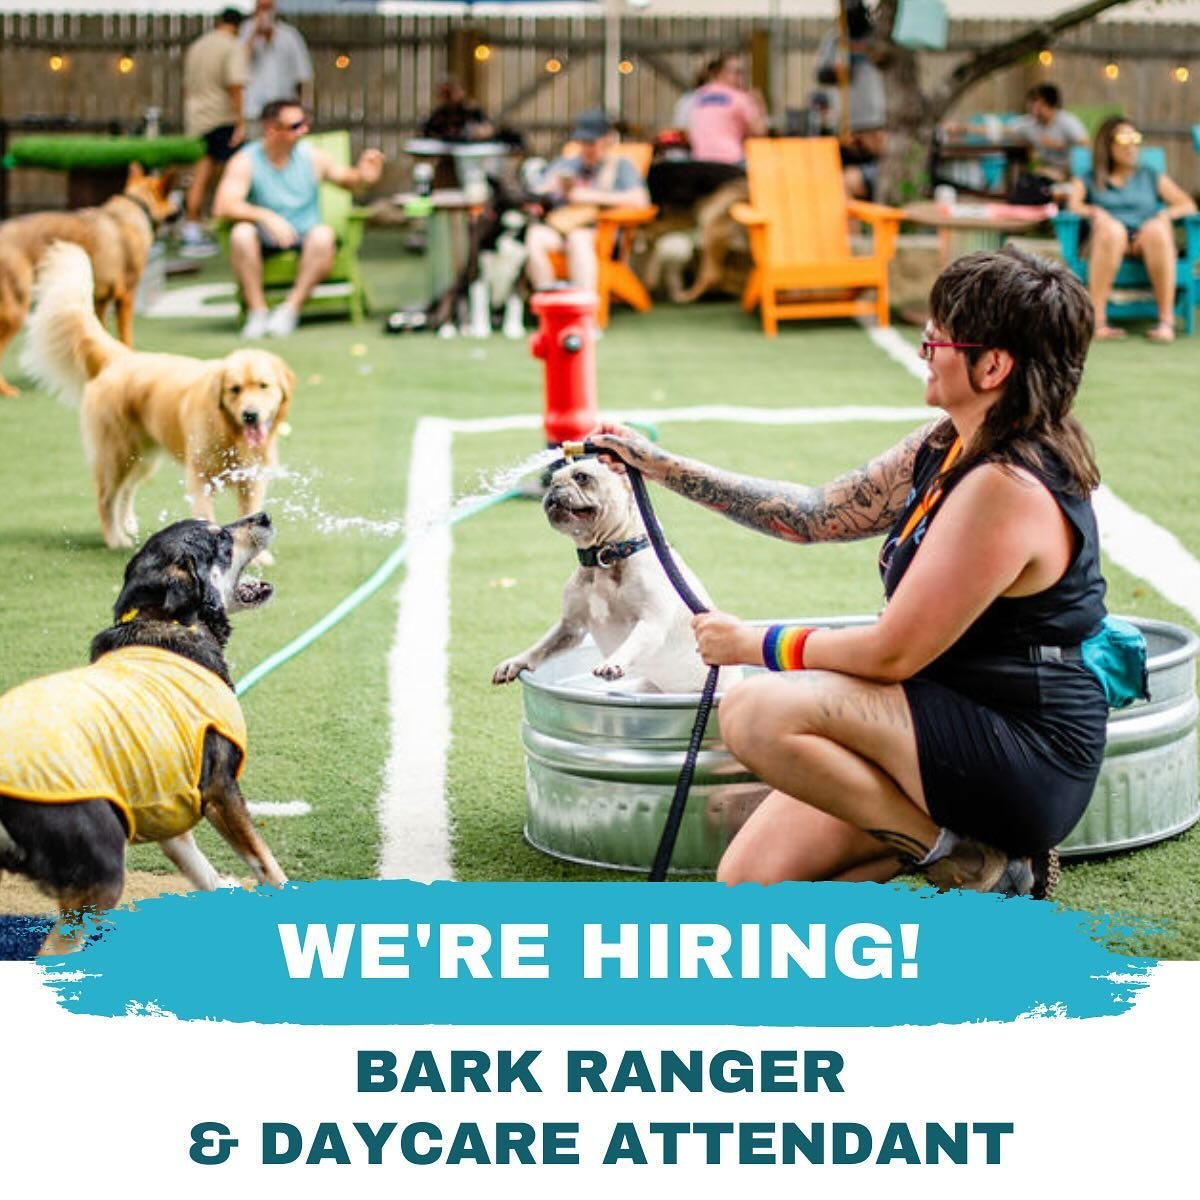 We are hiring! Check out our jobs page for more info. 

www.omahadogbar.com/jobs